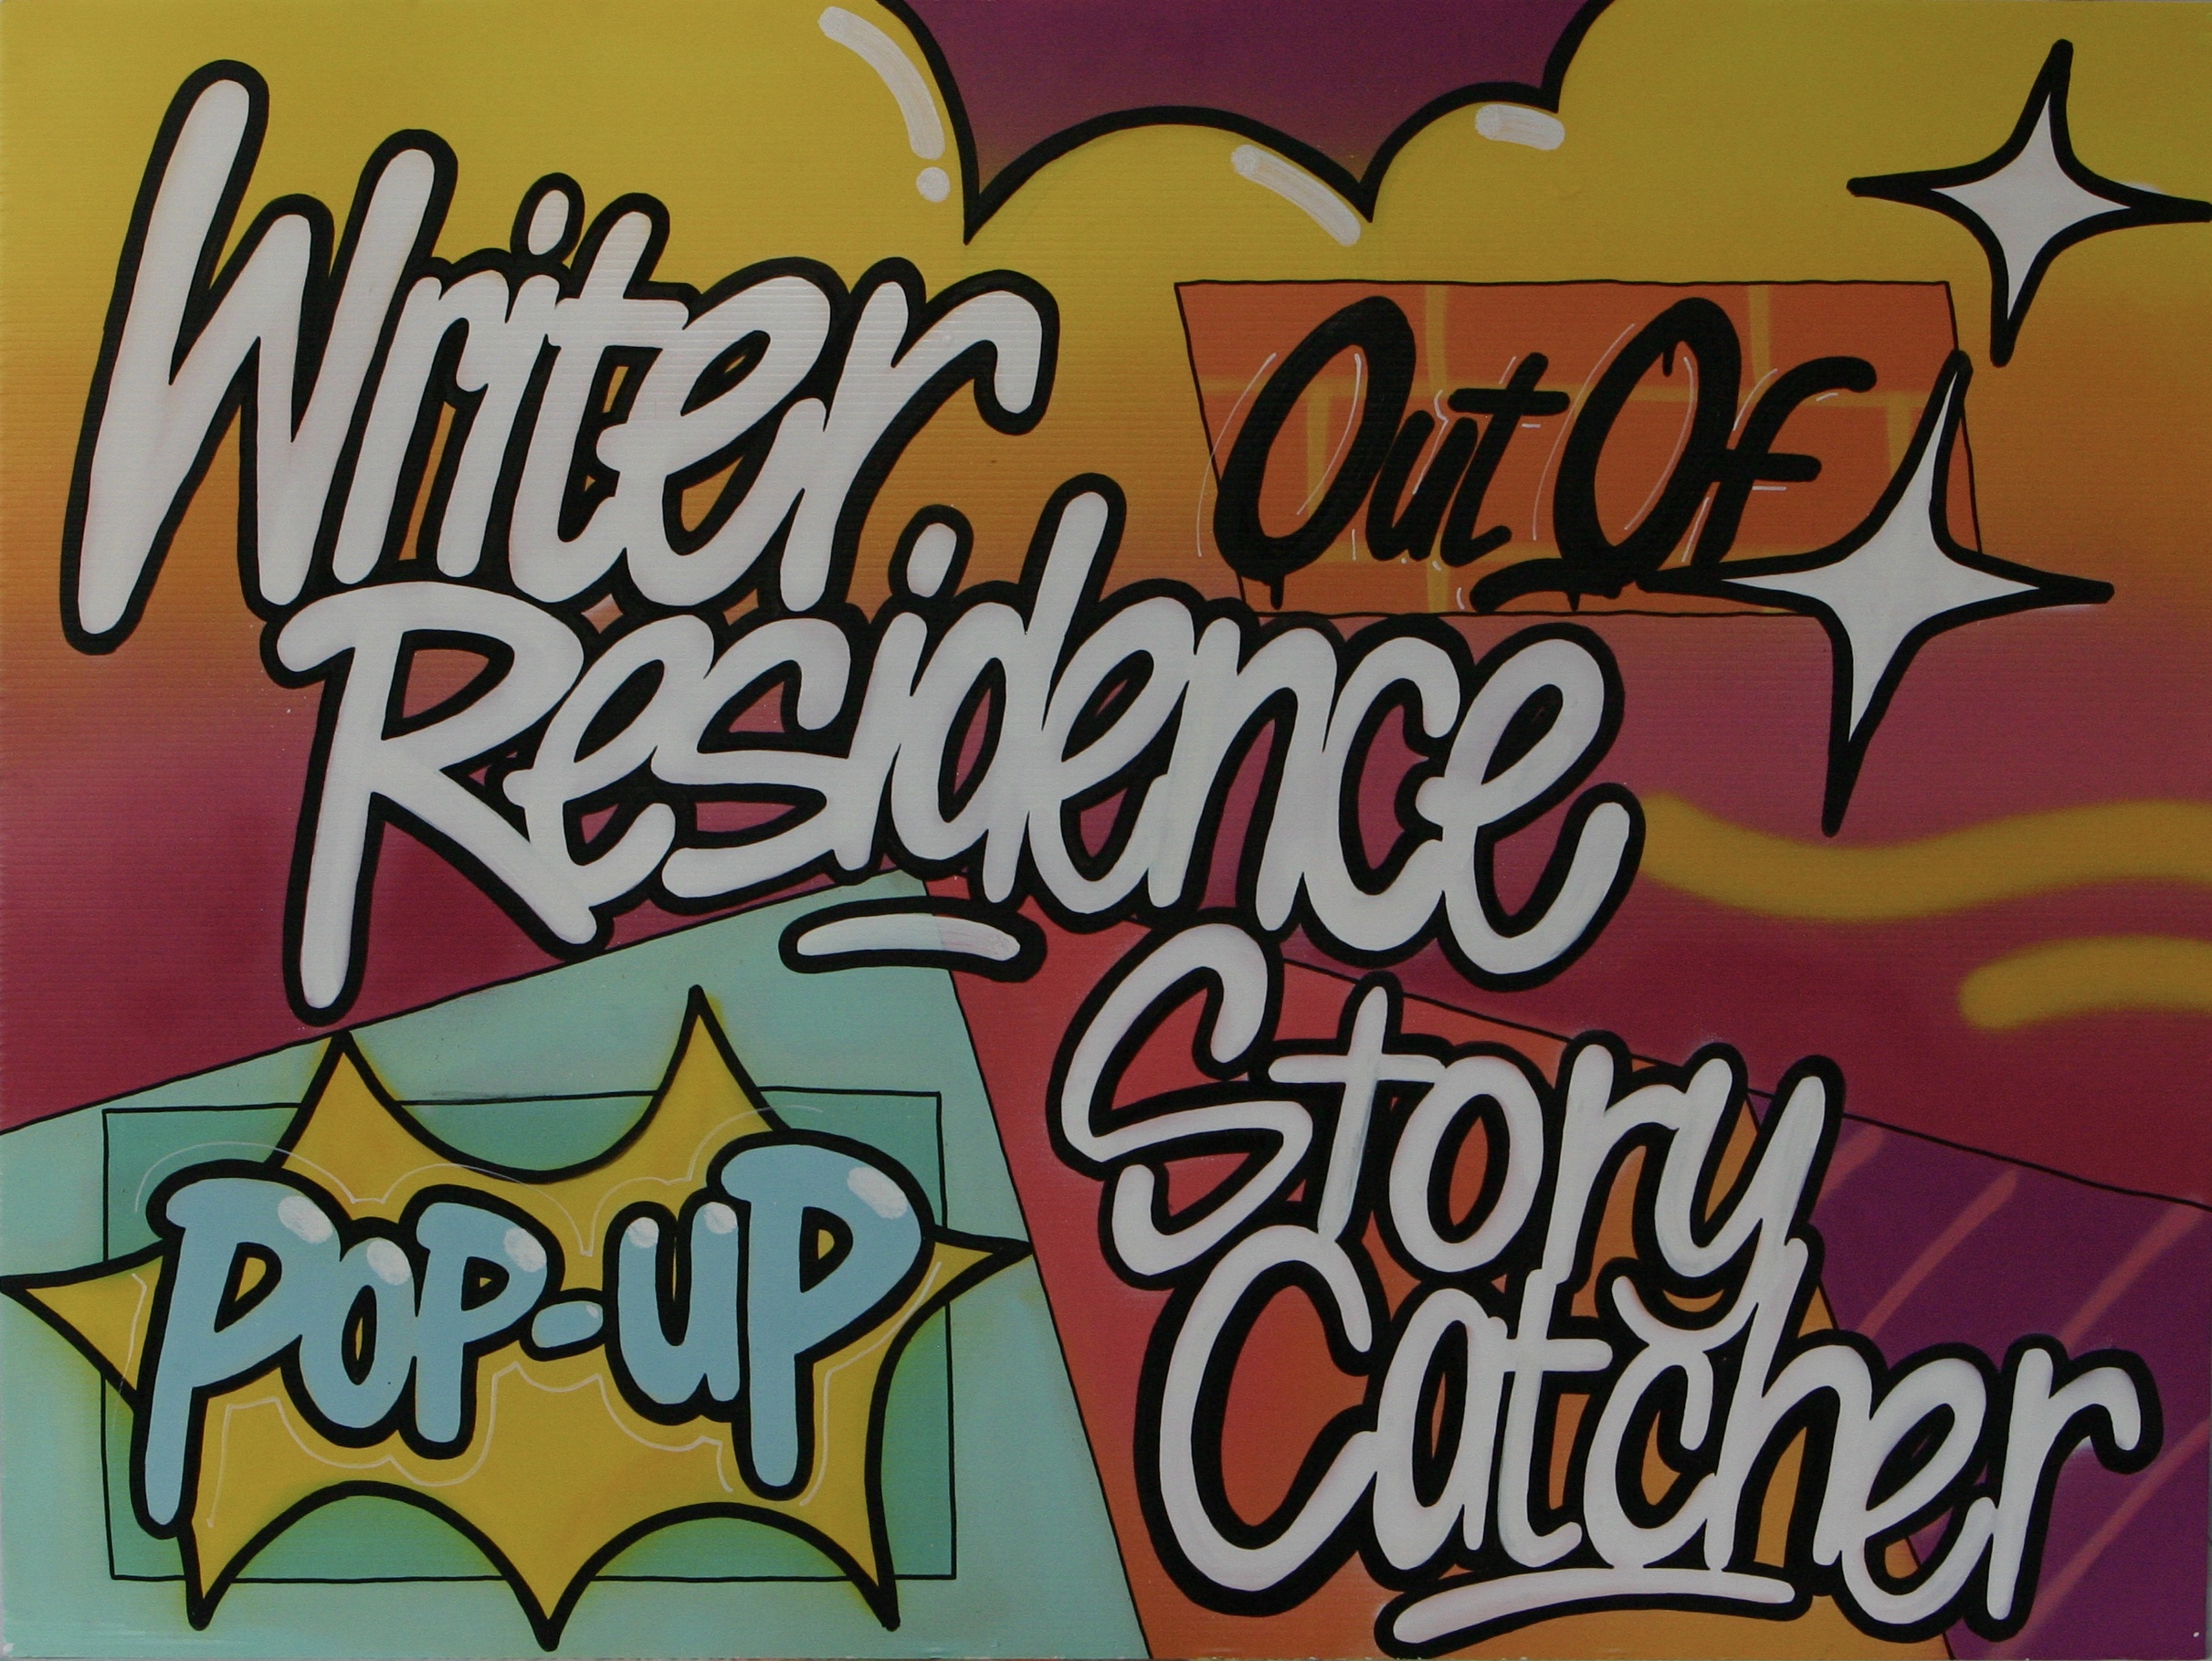 Behind the scenes with the Pop-Up Story Catcher & Writer – Out Of – Residence